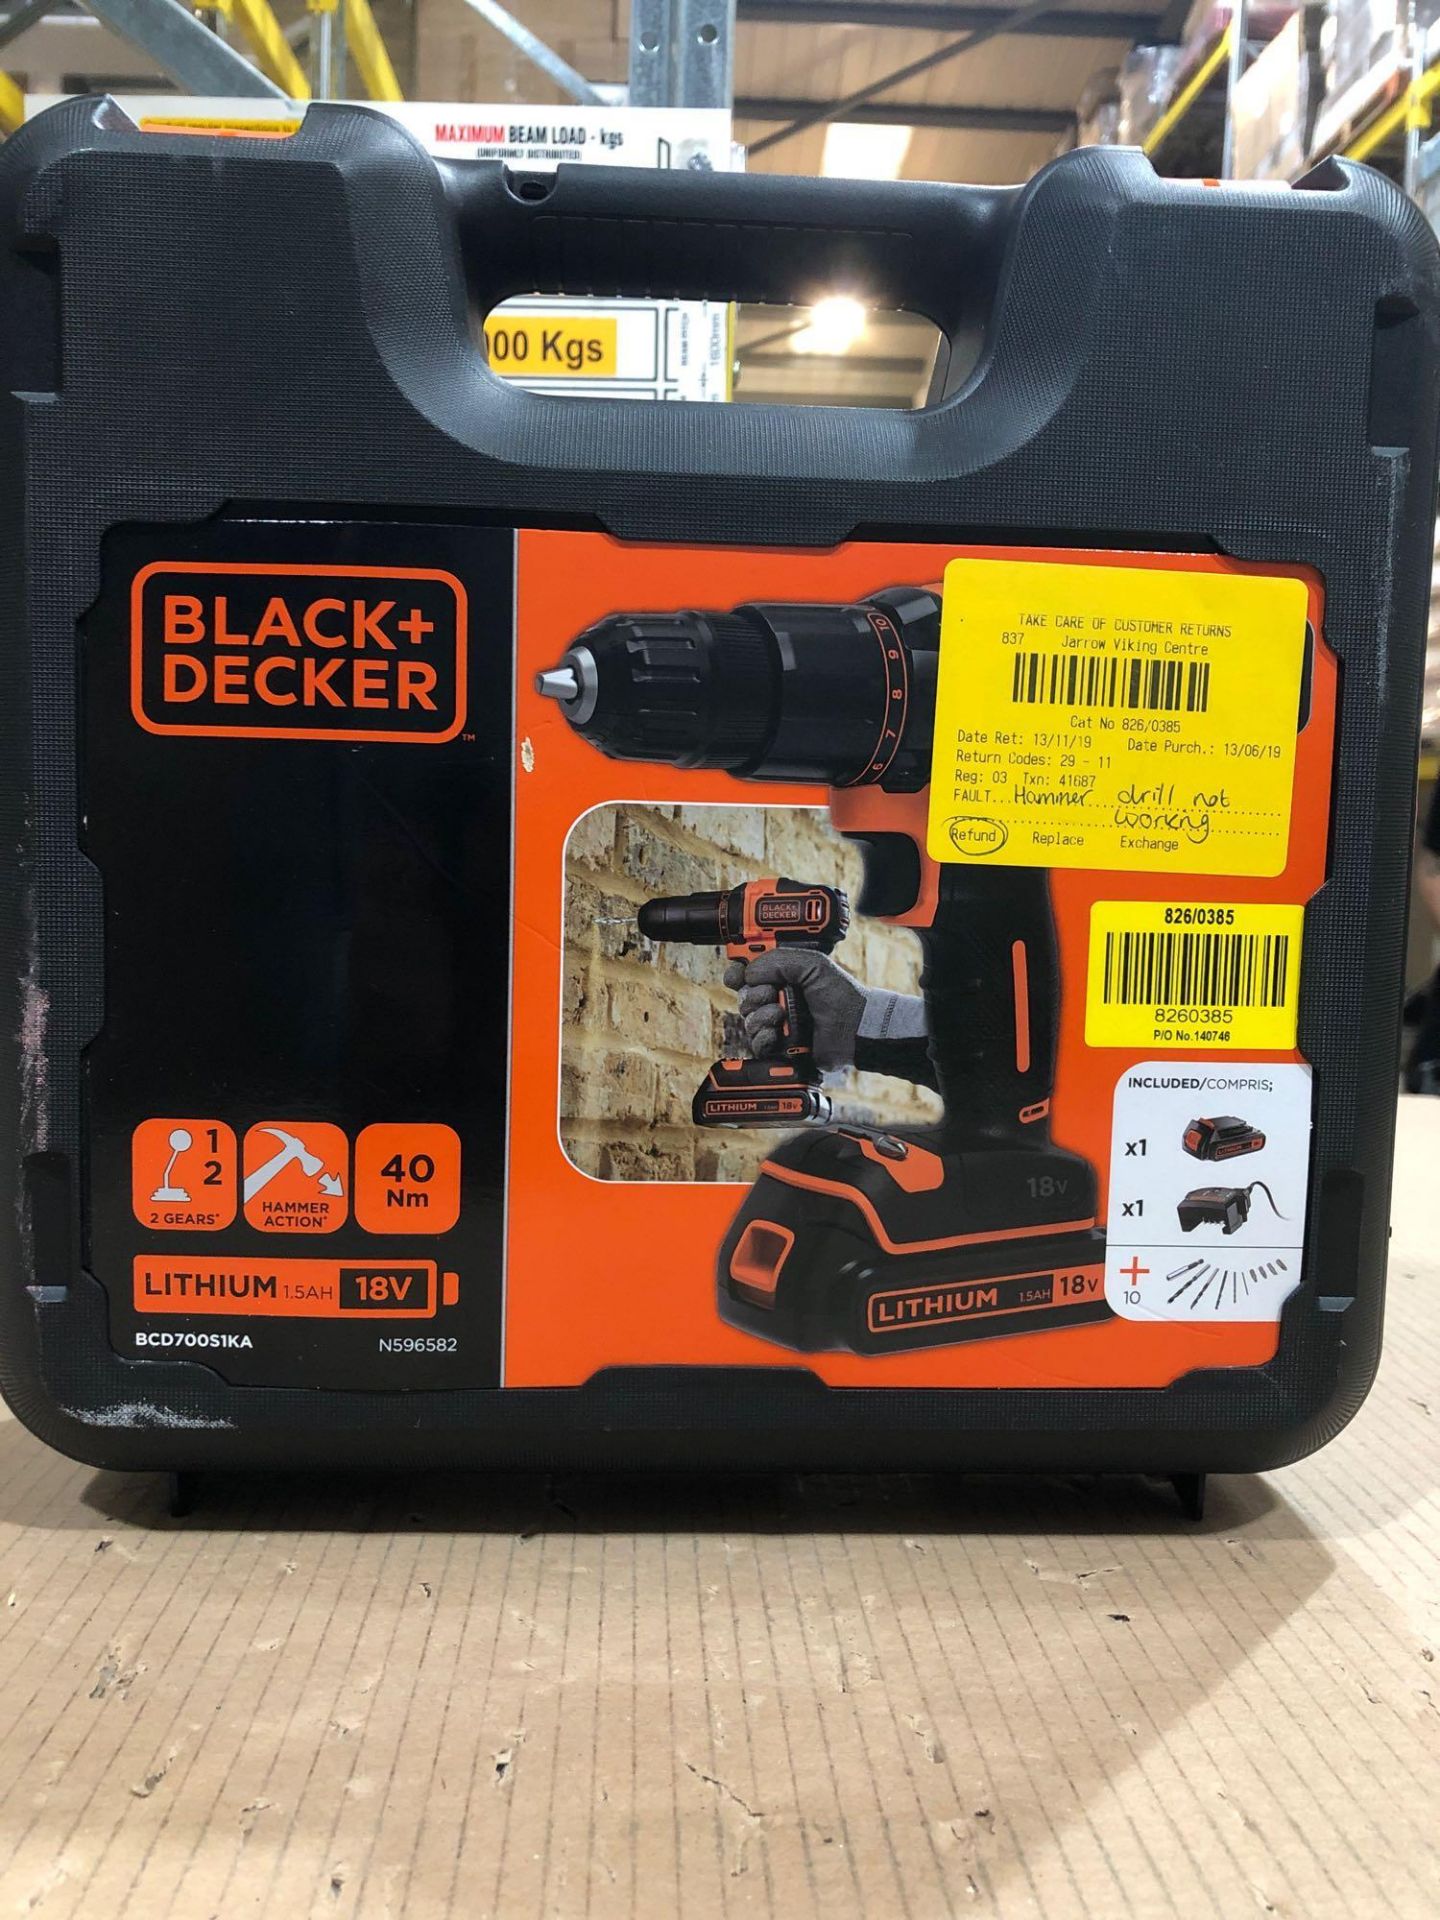 Black + Decker BCD700S1KA Hammer Drill with Battery - 18V £50.00 RRP - Image 2 of 6